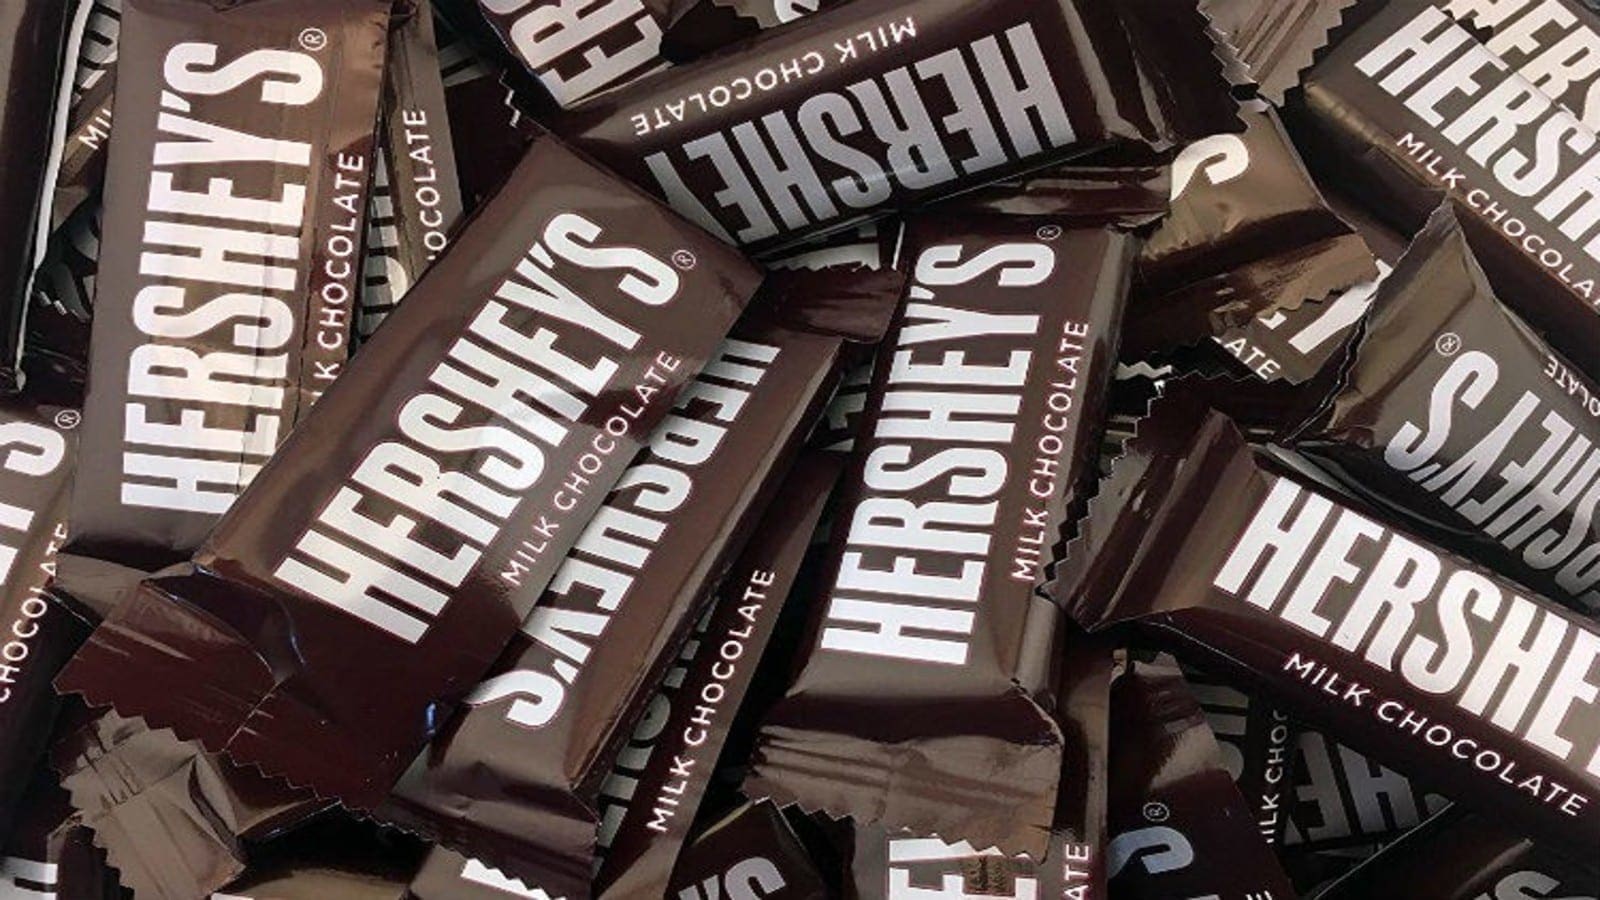 Hershey reorganizes business, makes key appointment to Canadian unit